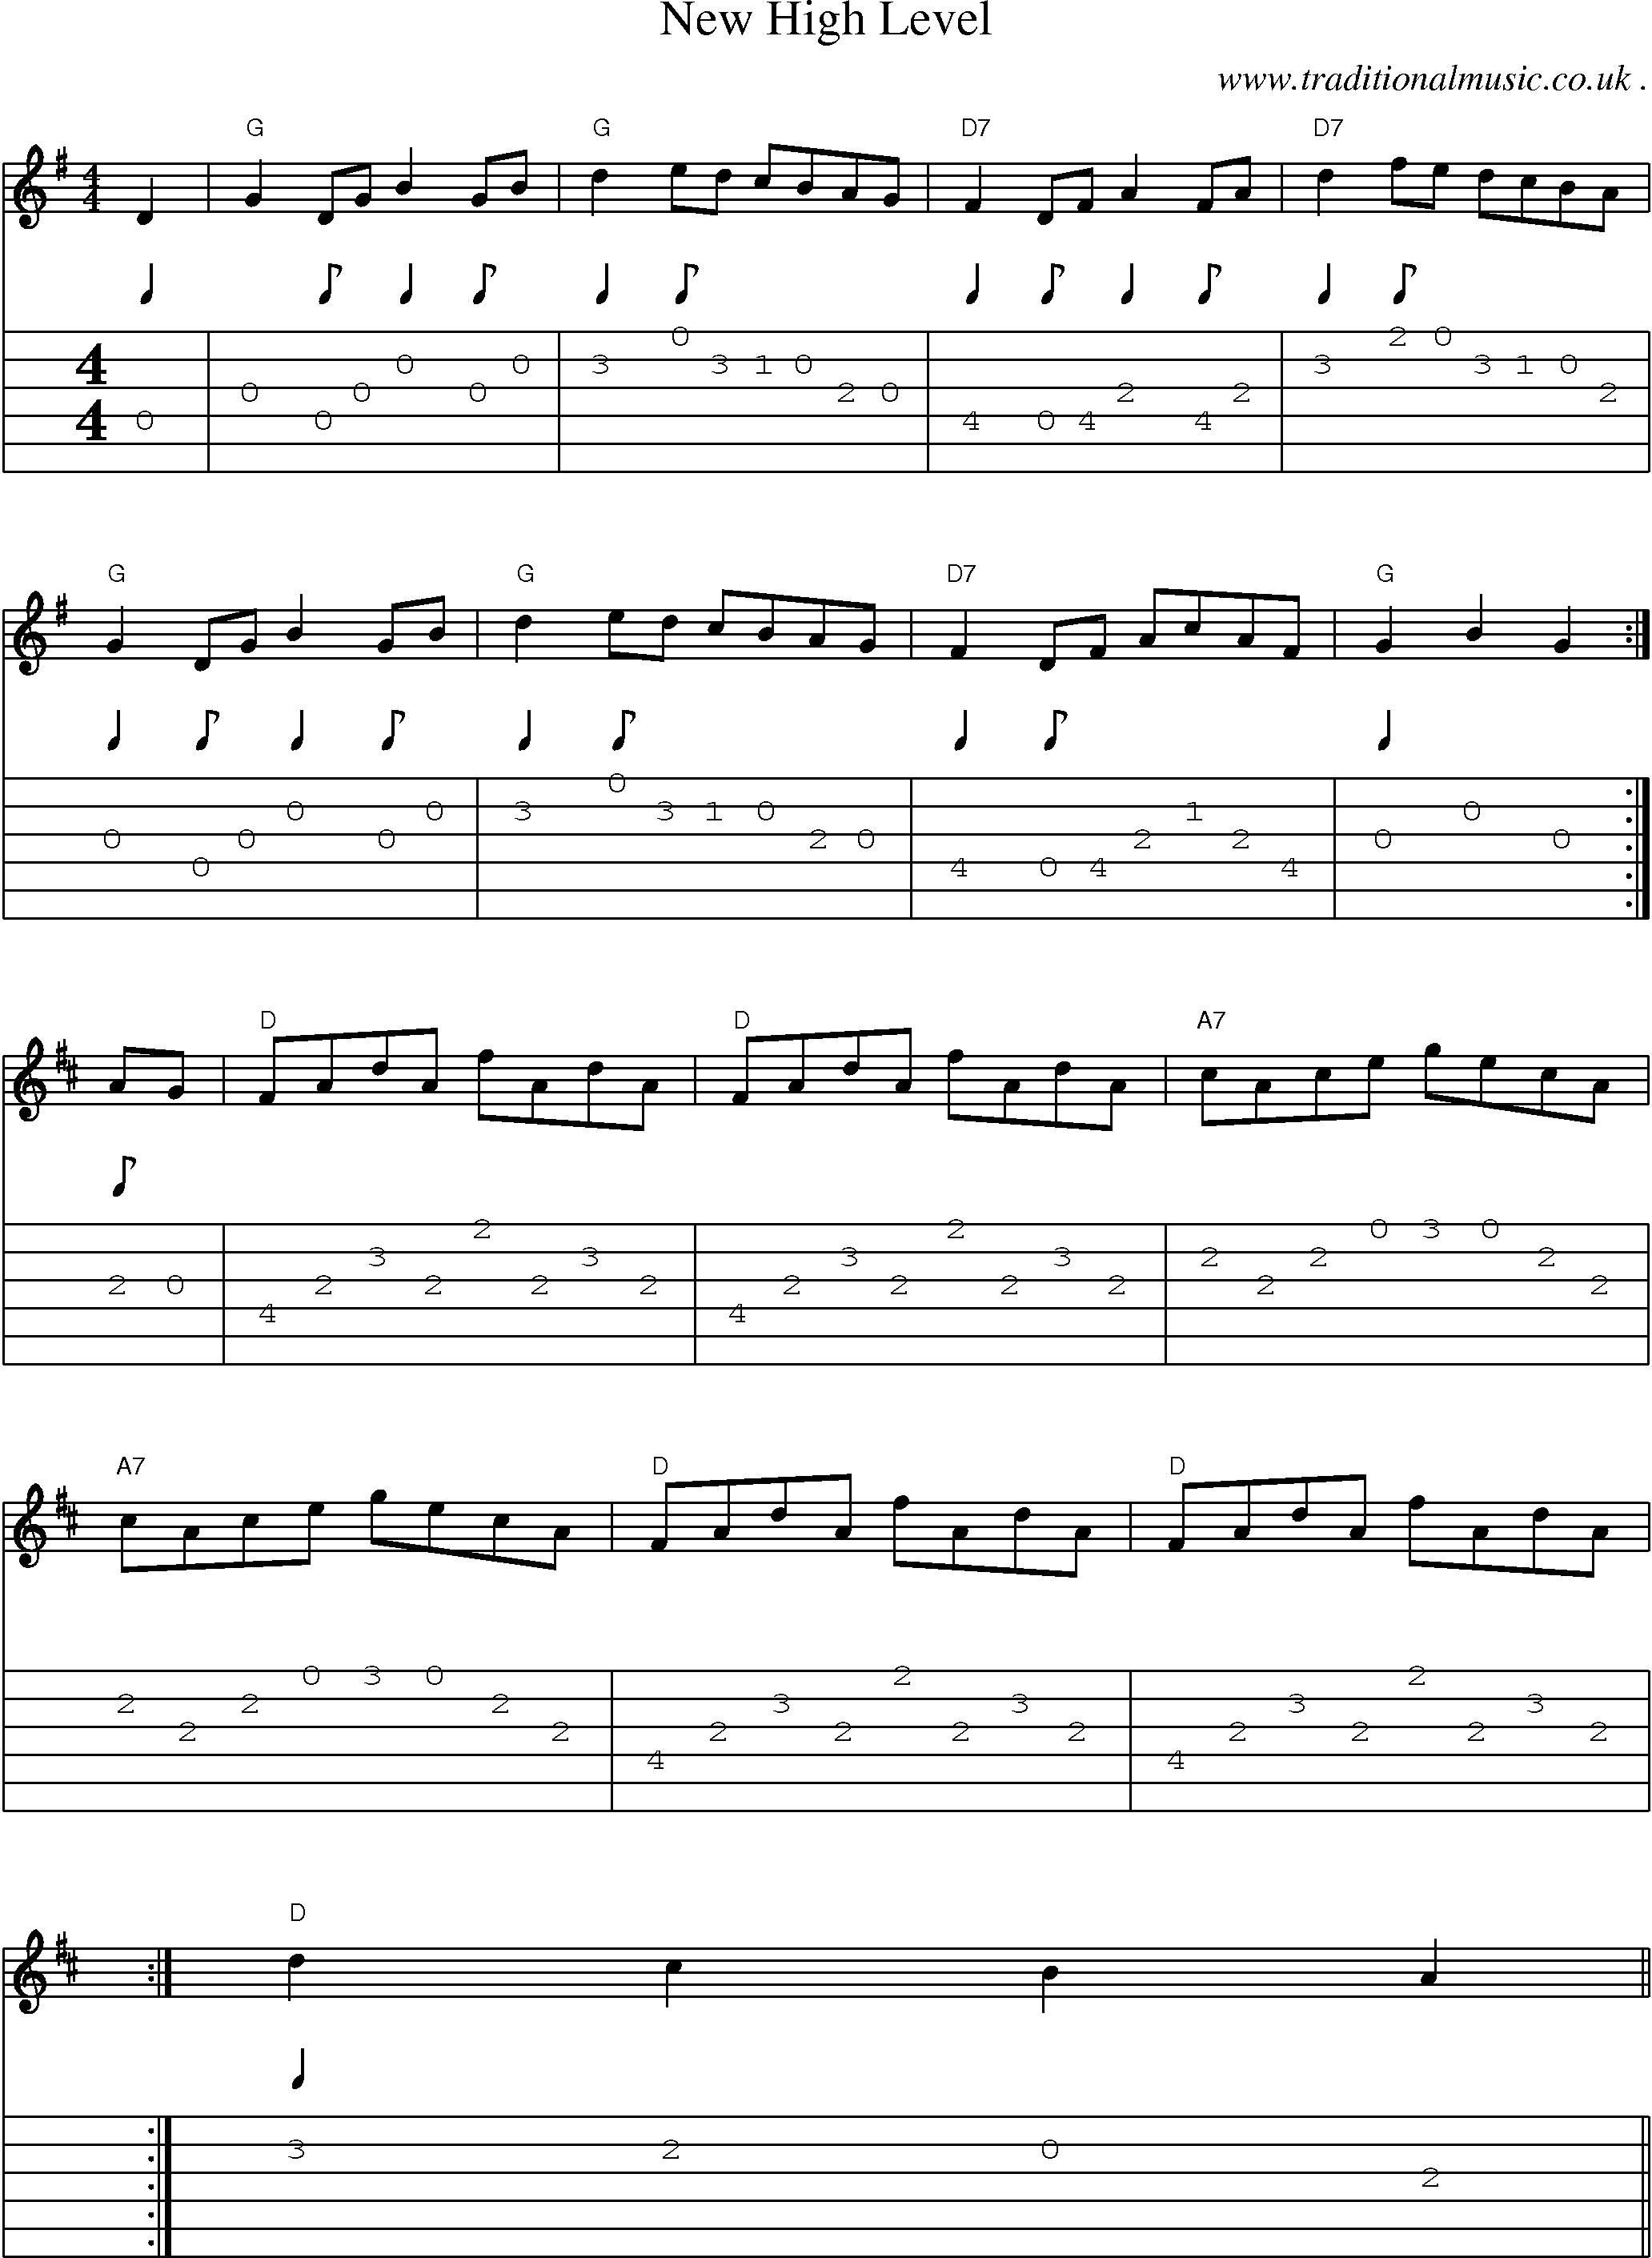 Sheet-Music and Guitar Tabs for New High Level